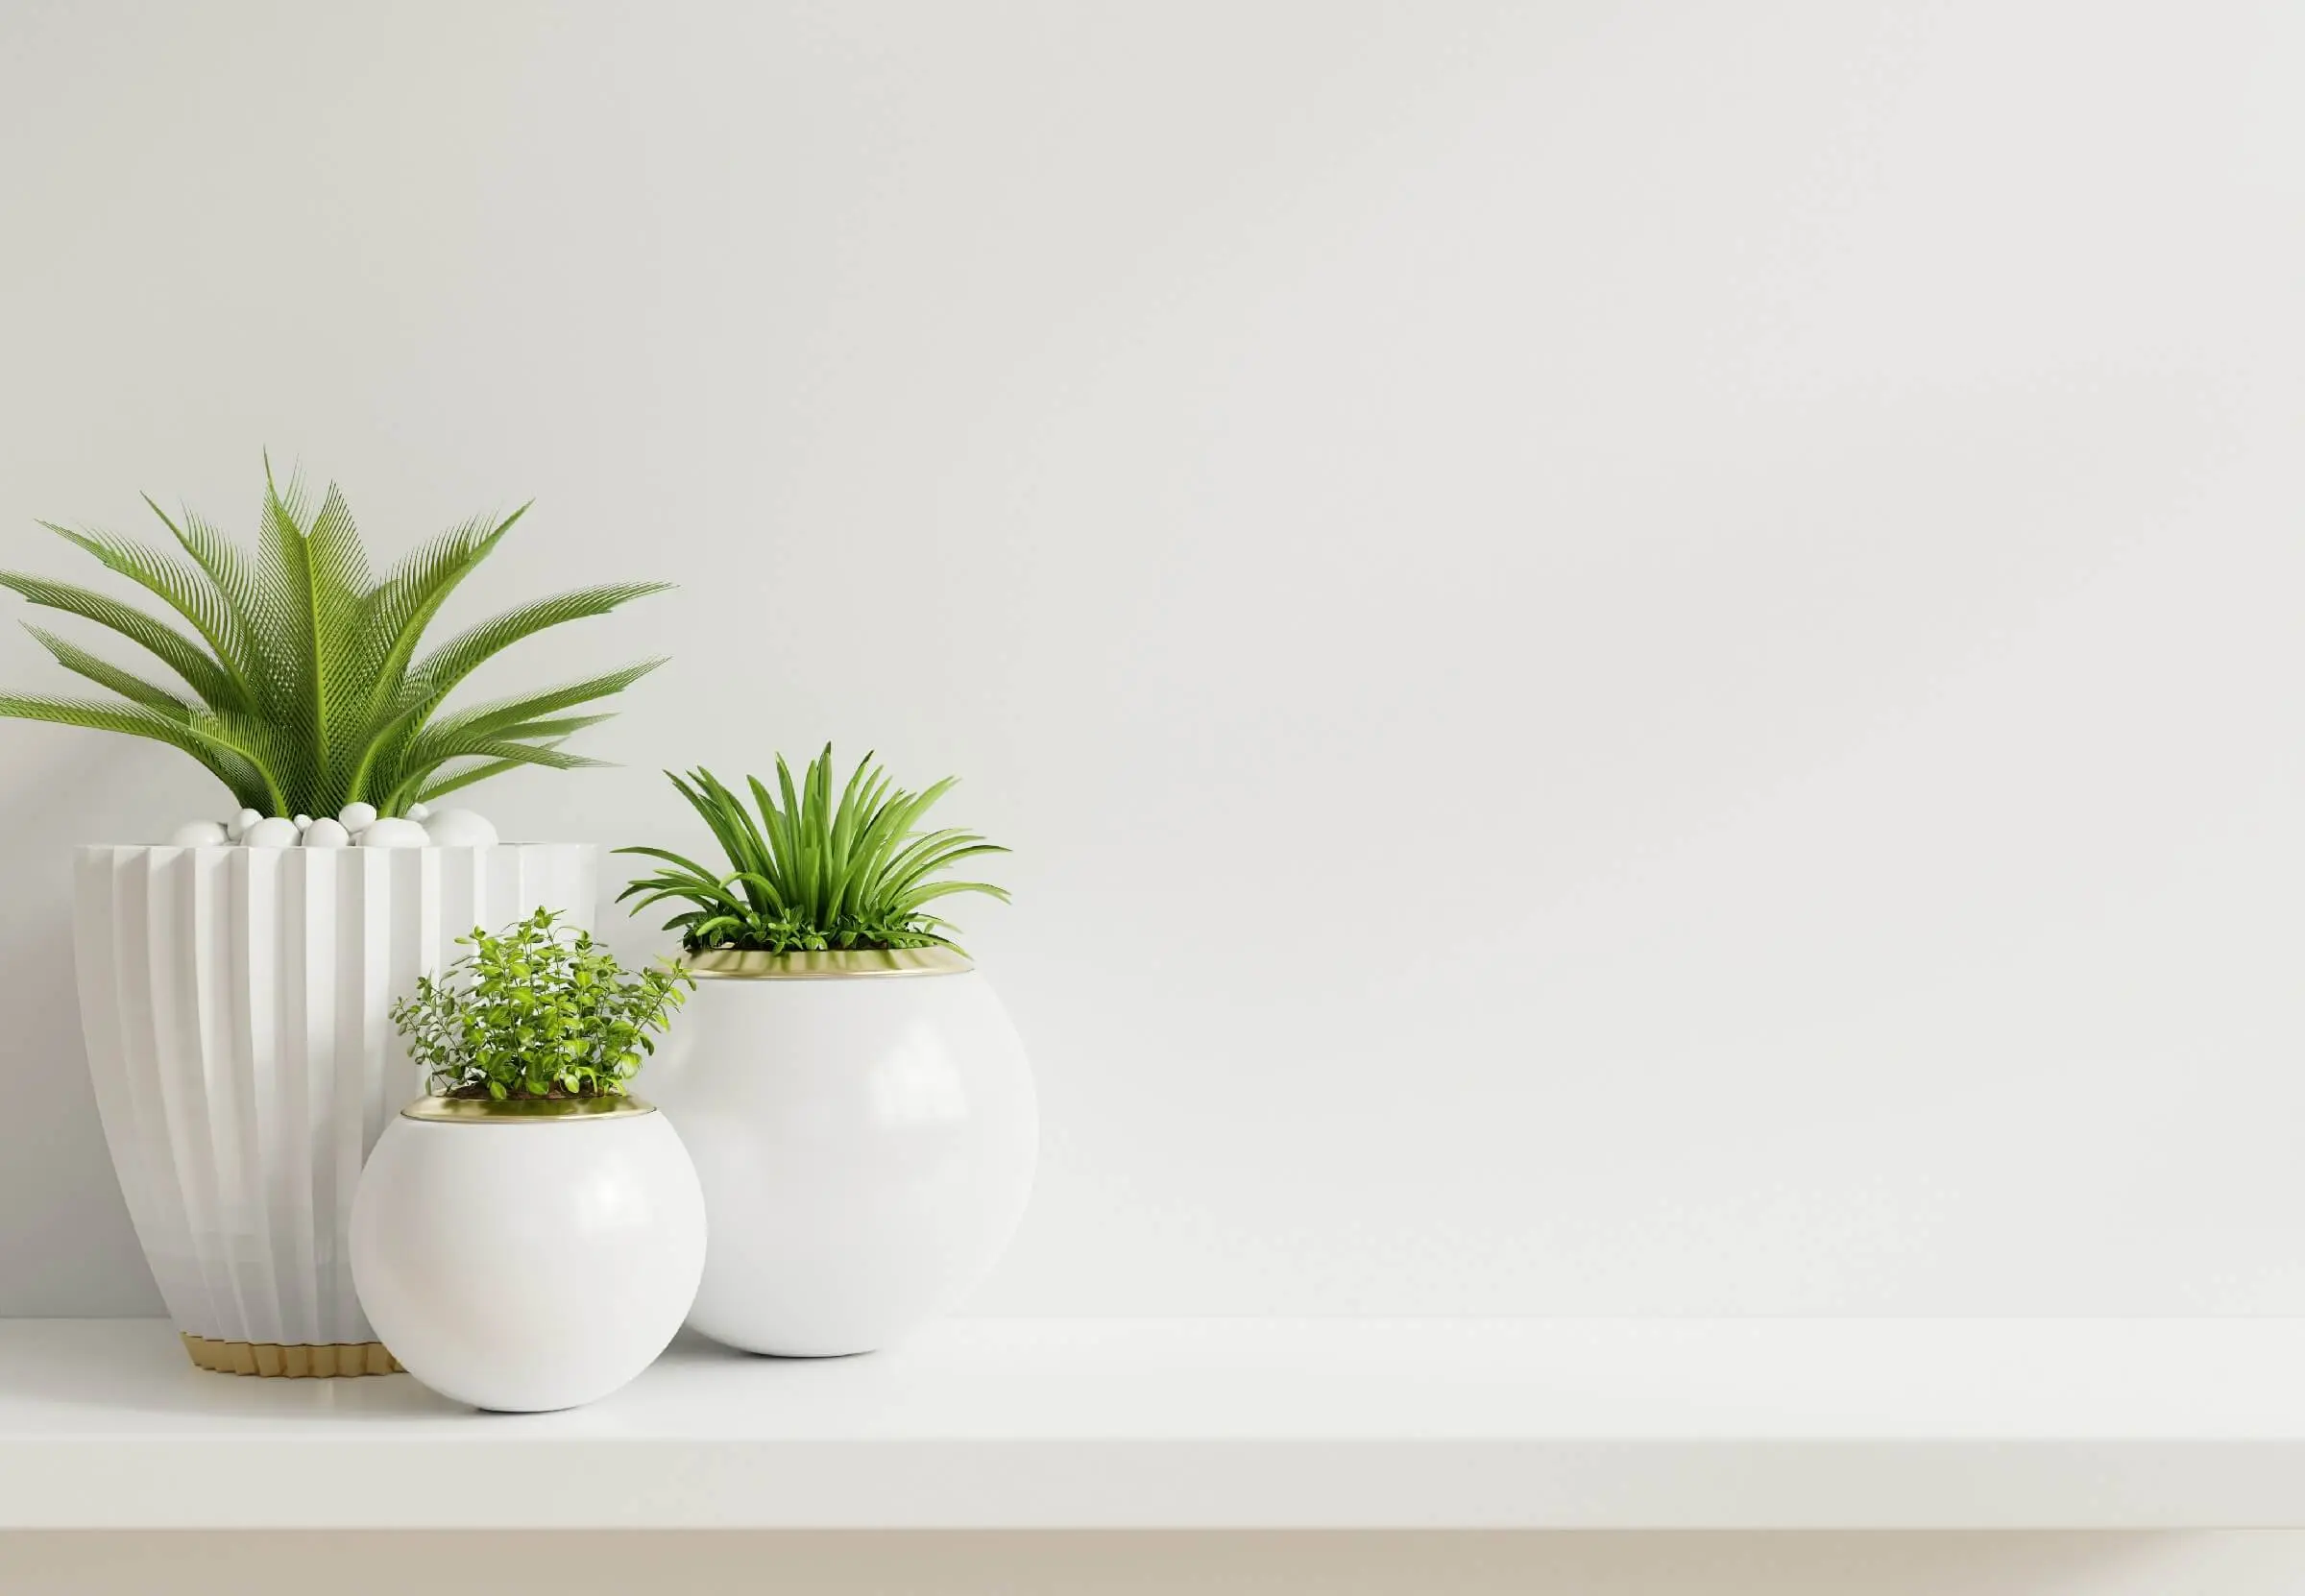 Get some plants for your office desk decor